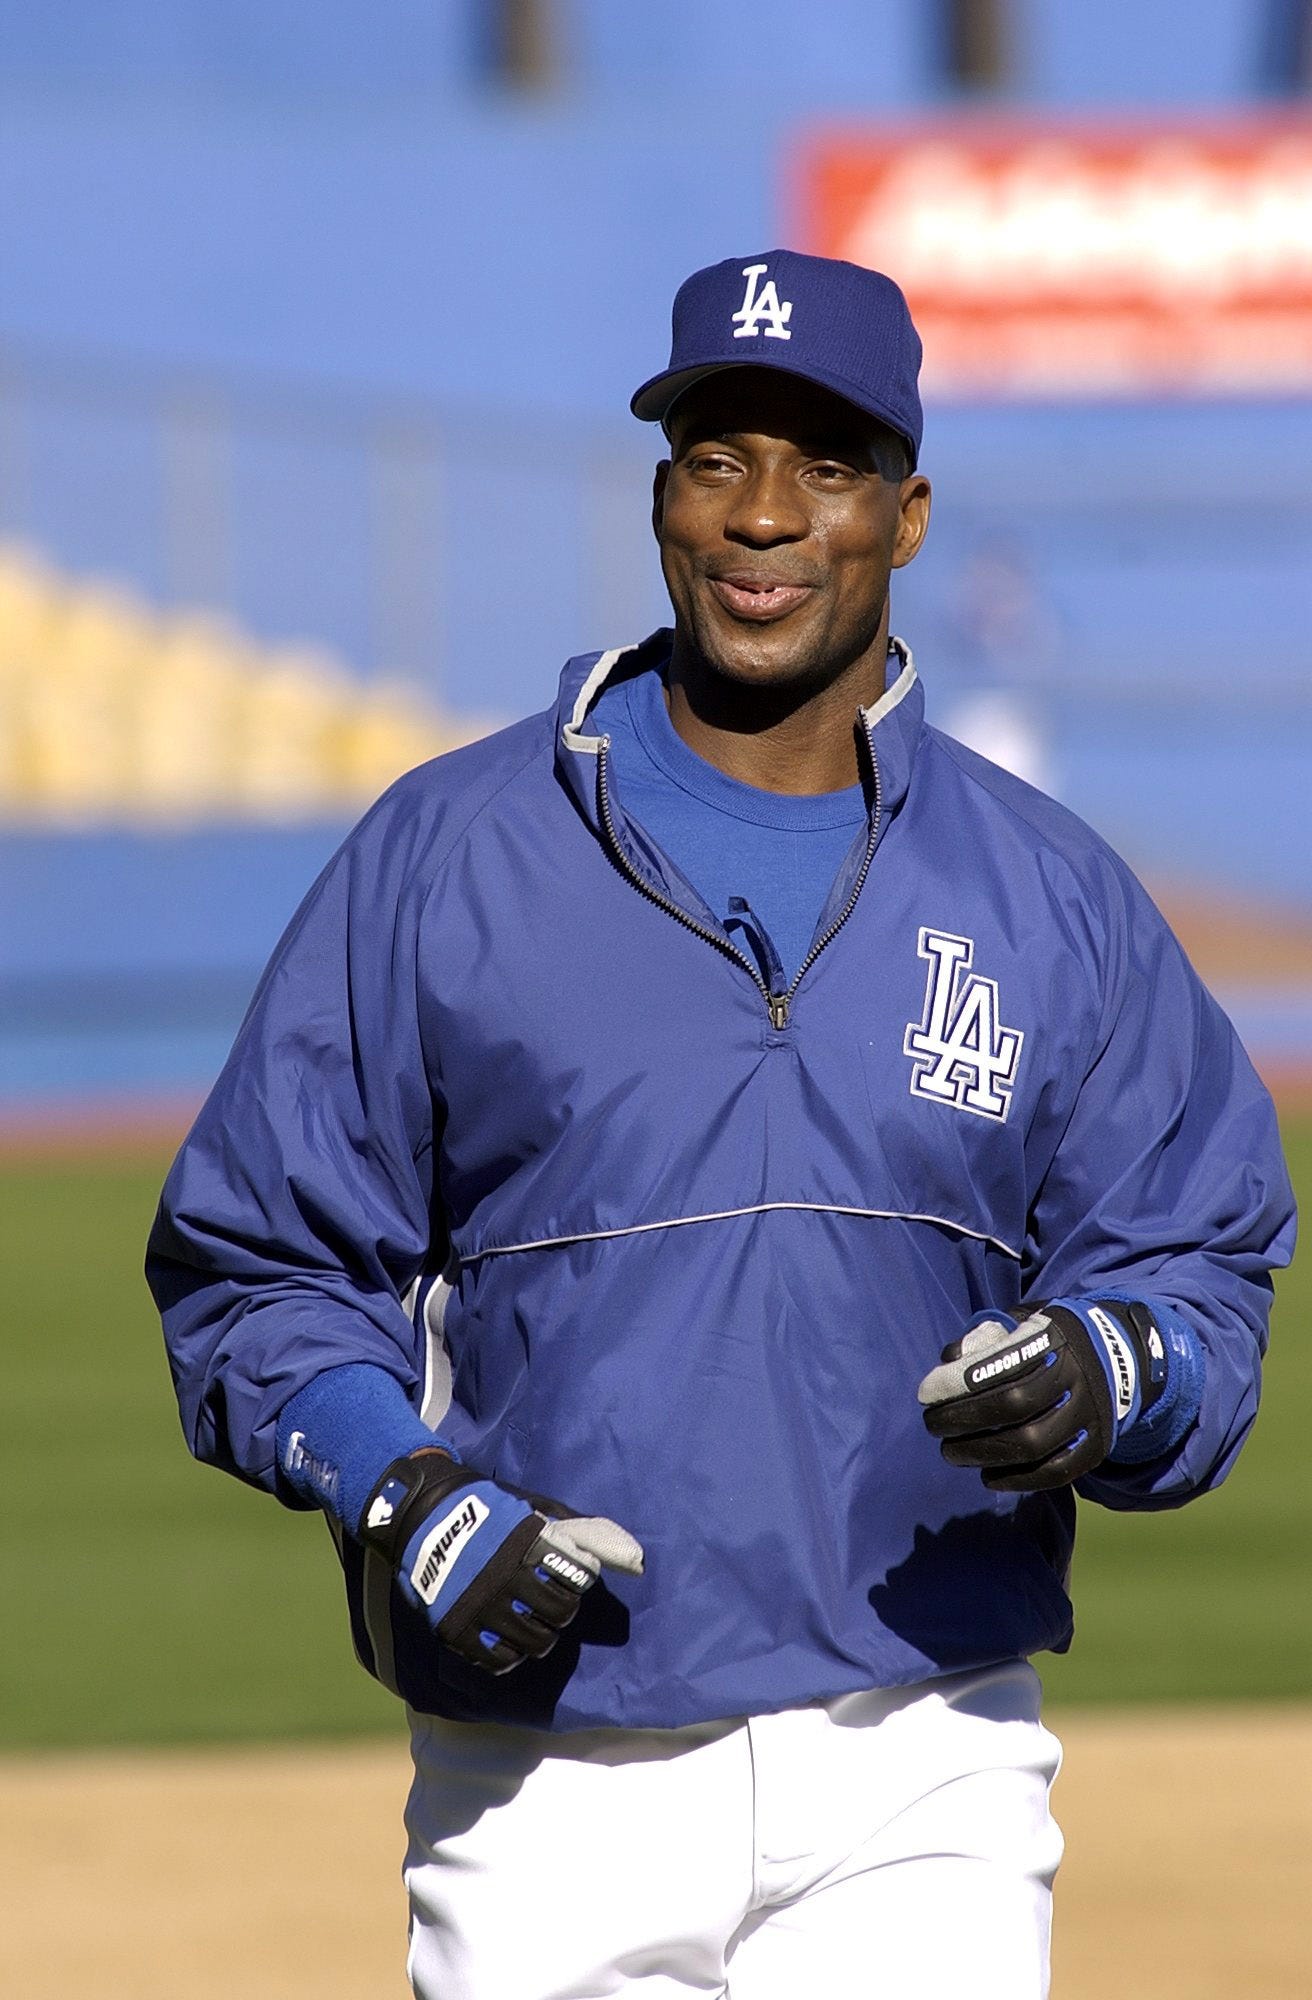 Former Dodgers fall short in Hall of Fame balloting | by Jon Weisman |  Dodger Insider